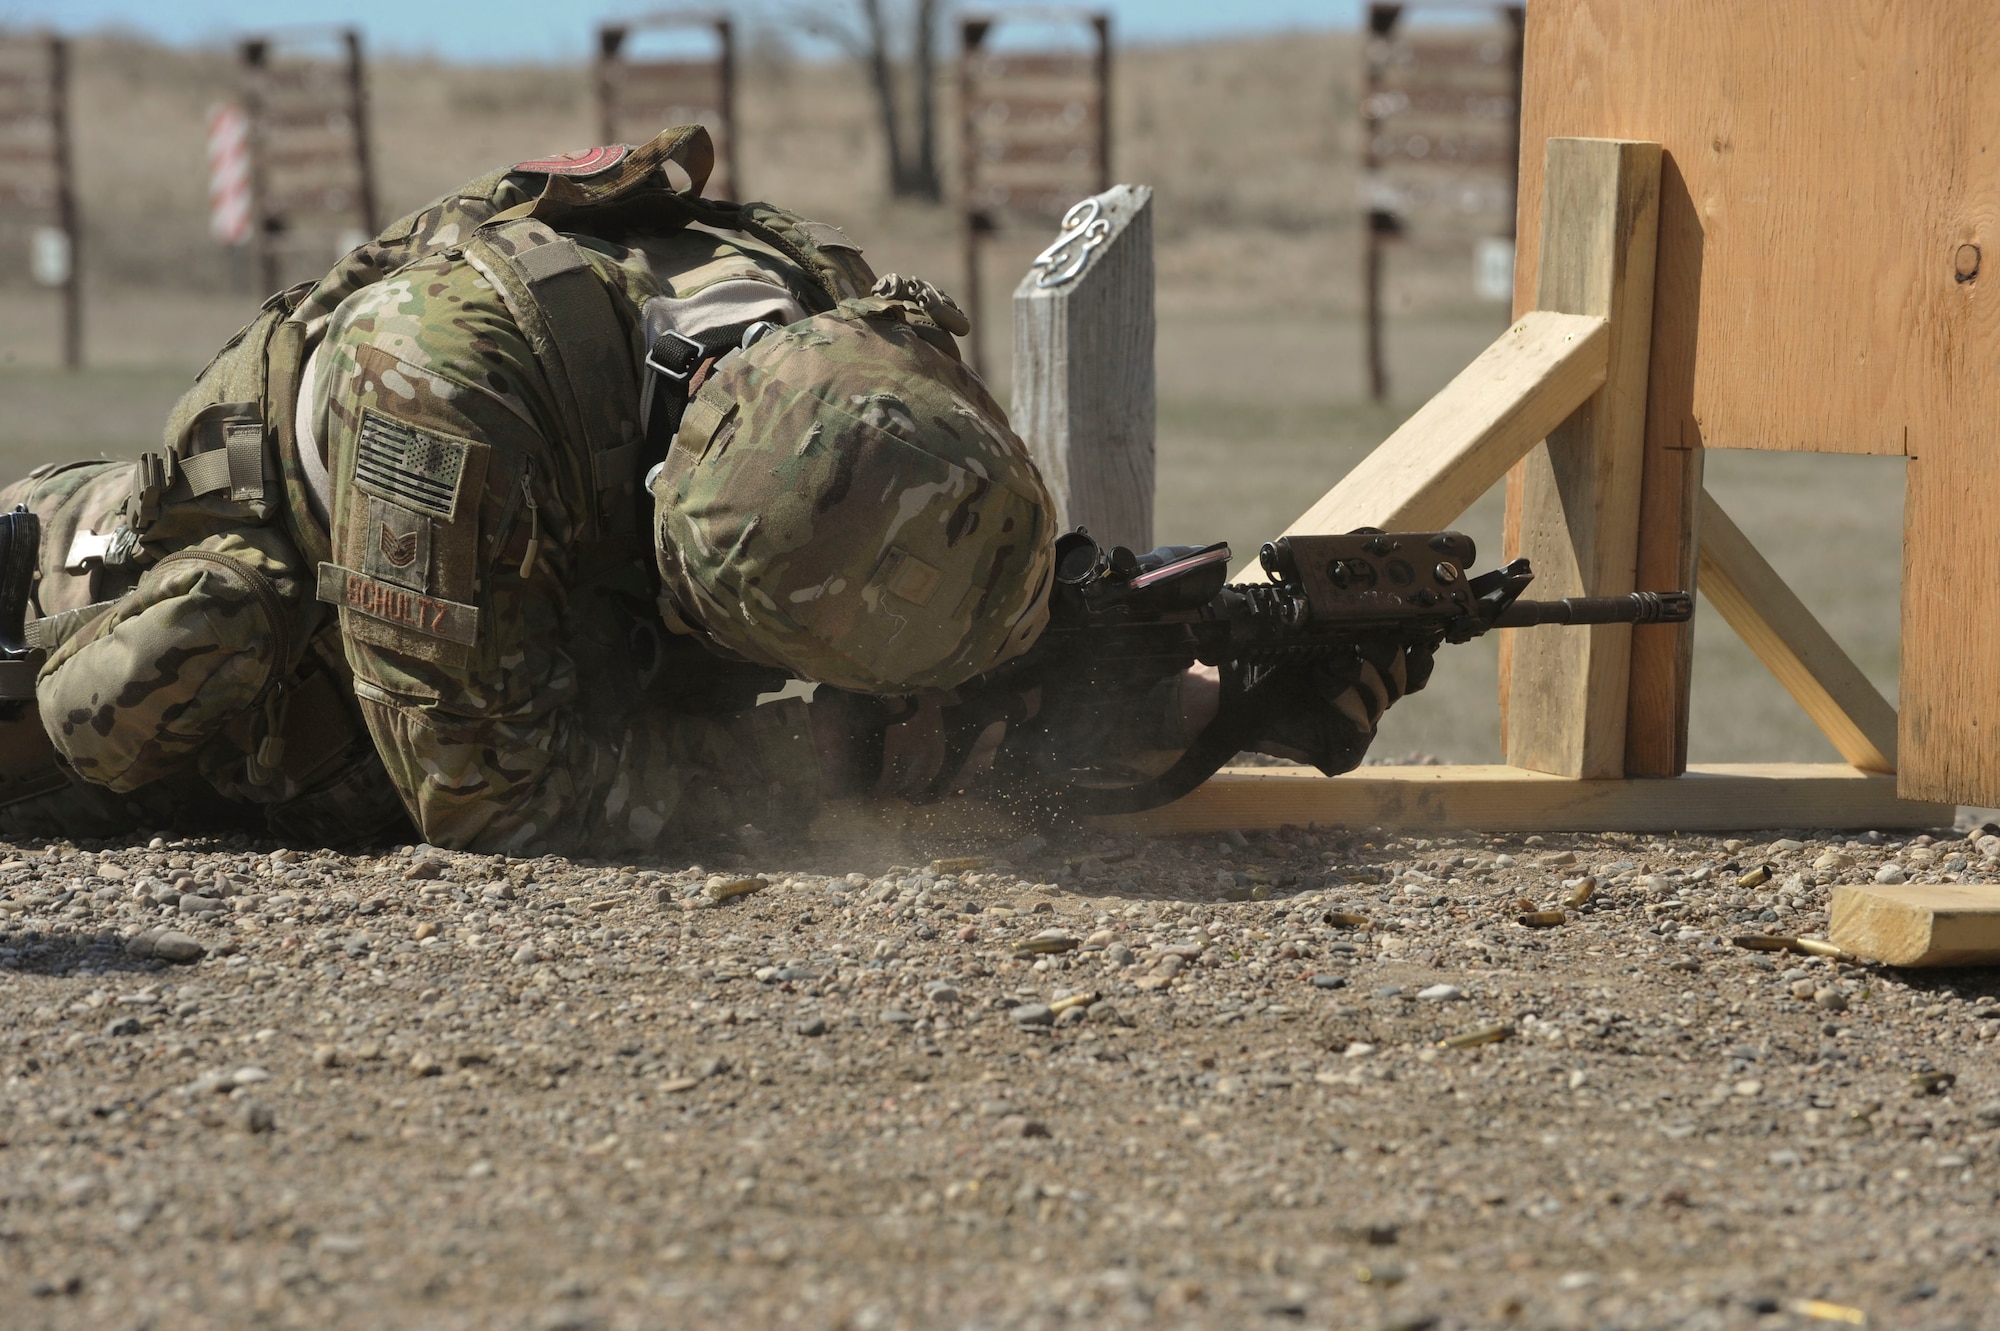 Tech. Sgt. Christopher Schultz, 91st Security Support Squadron training NCO in charge, fires an M4 carbine at Camp Grafton South, Devil’s Lake, N.D., May 4, 2017. The team trained in preparation for the upcoming competition, which challenges security forces tactics, job knowledge and weapons firing. (U.S. Air Force photo/Airman 1st Class Jessica Weissman)